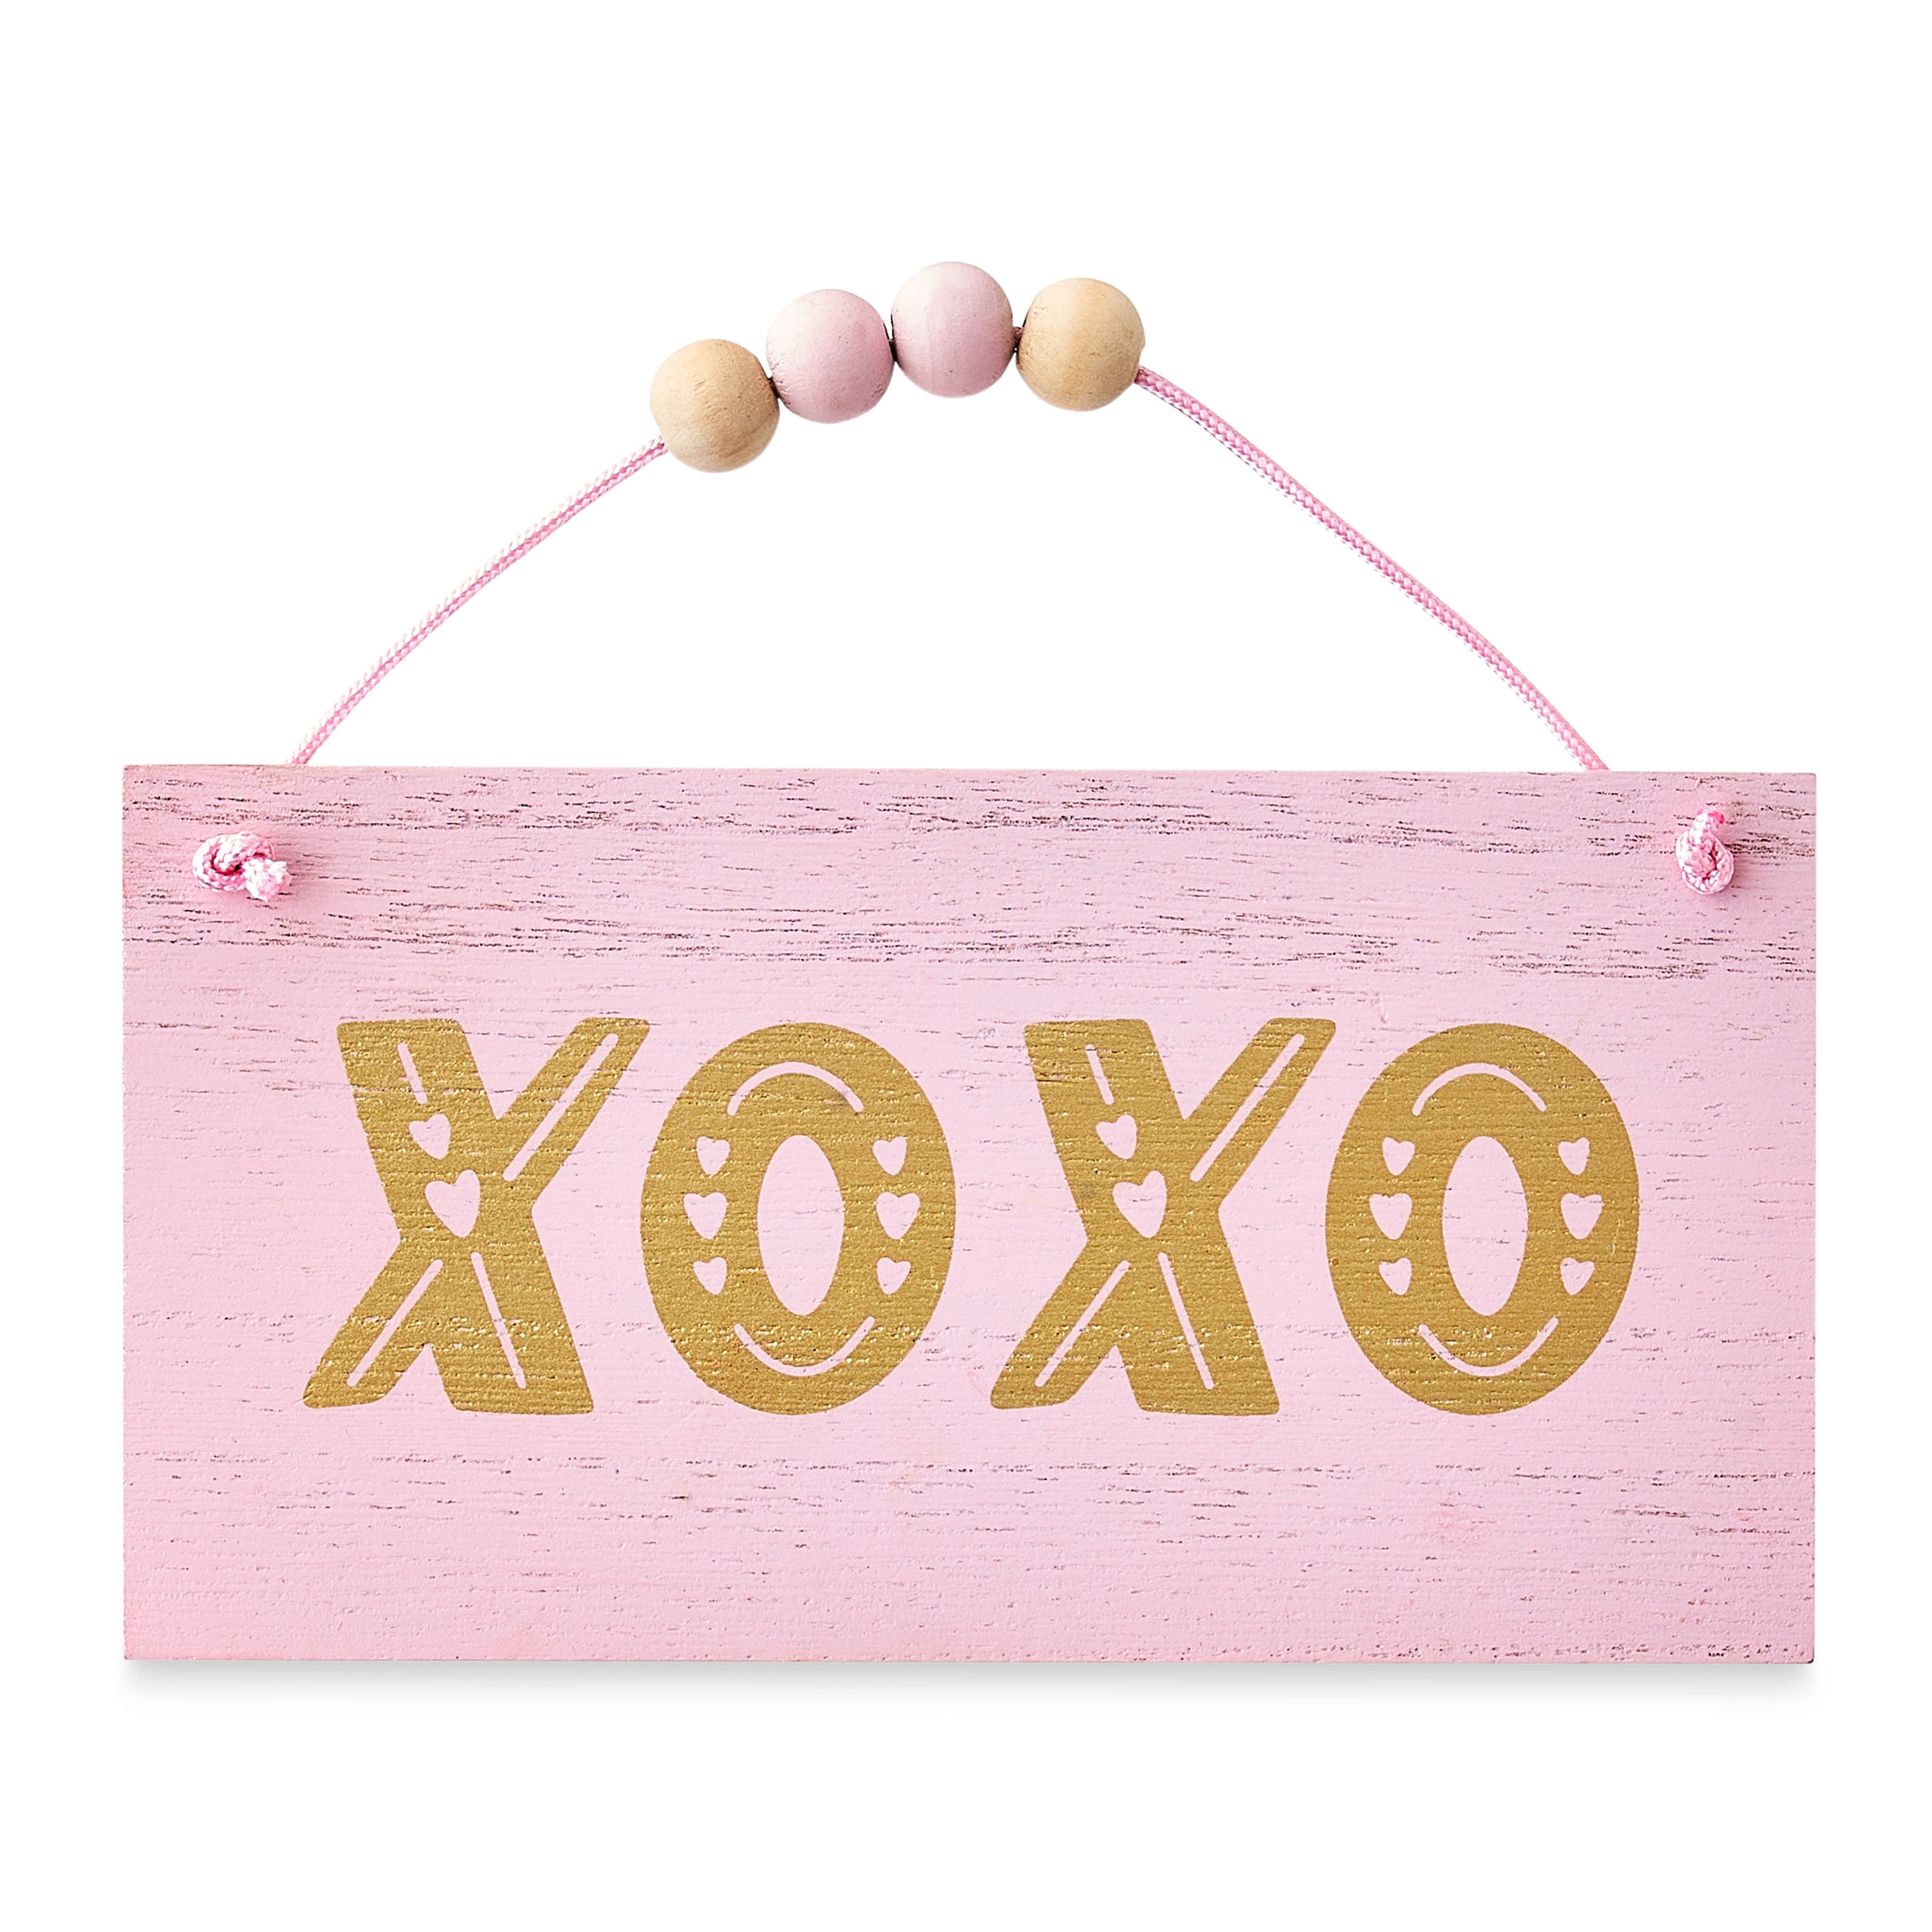 WAY TO CELEBRATE! Way to Celebrate 6" Mini Wooden Sign Plaque Wall Decoration, Pink